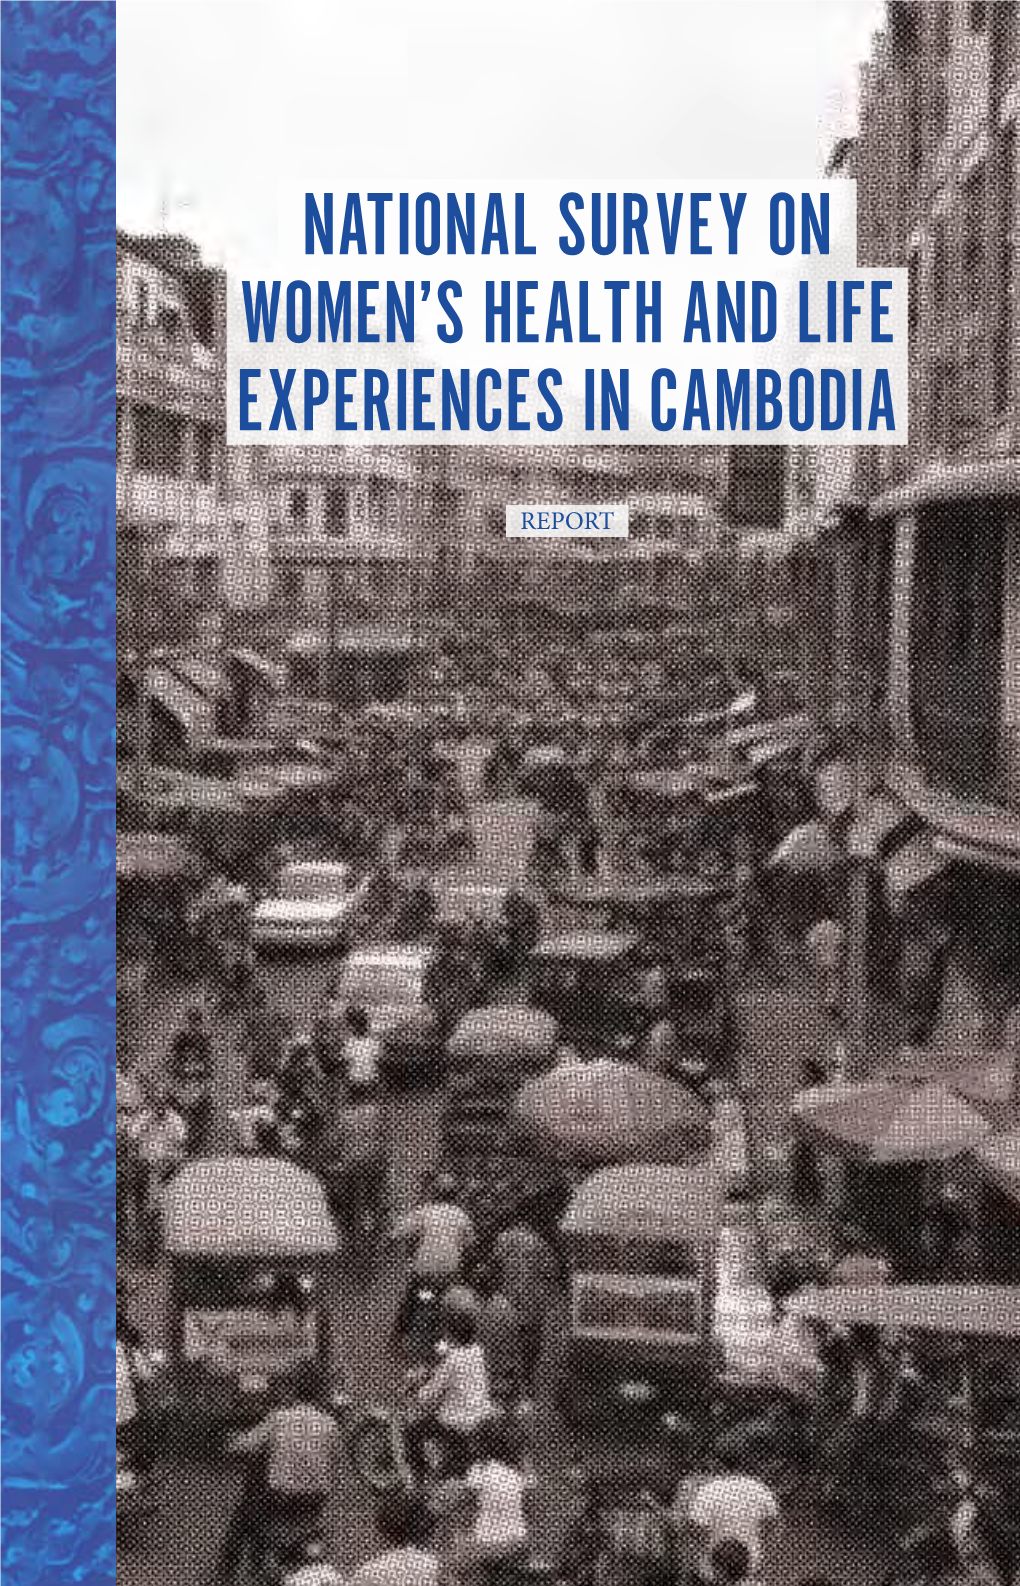 National Survey on Women's Health and Life Experiences in Cambodia